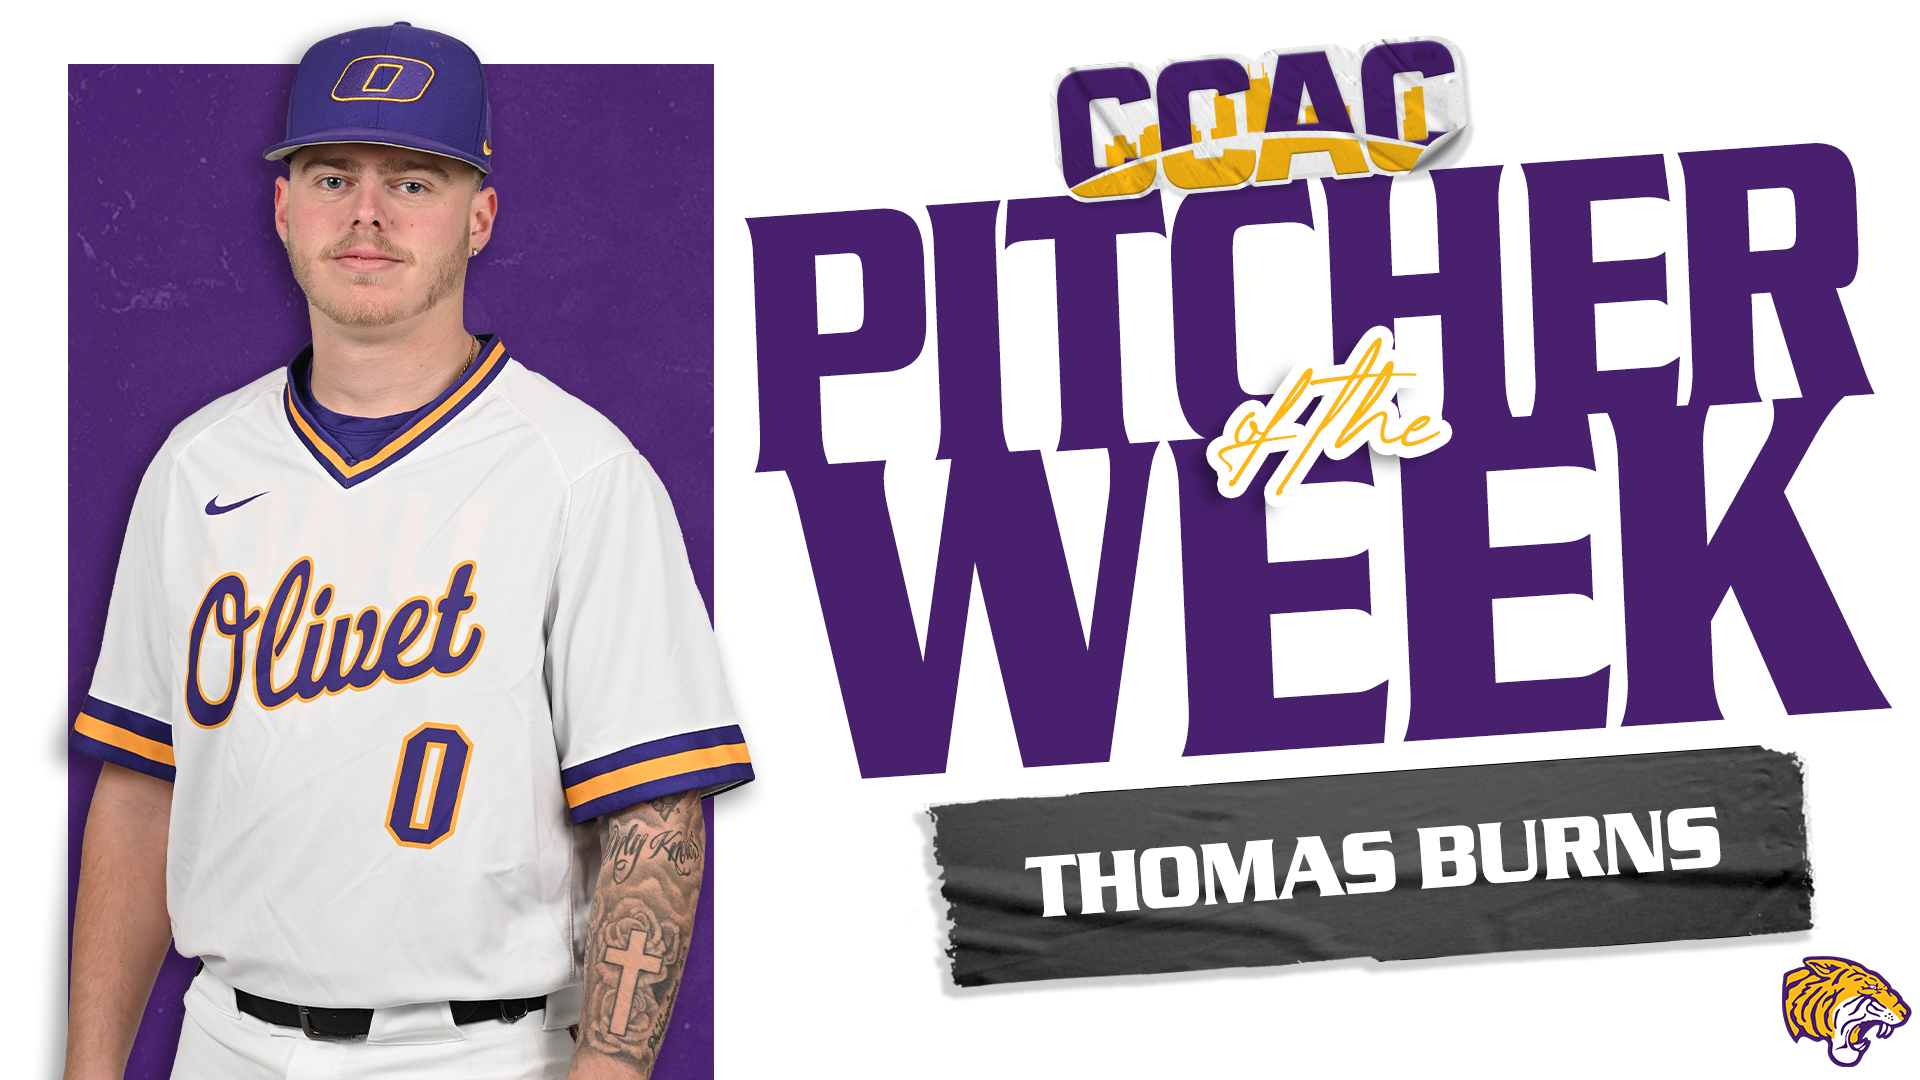 BURNS' GEM EARNS HIM CCAC PITCHER OF THE WEEK ACCOLADE